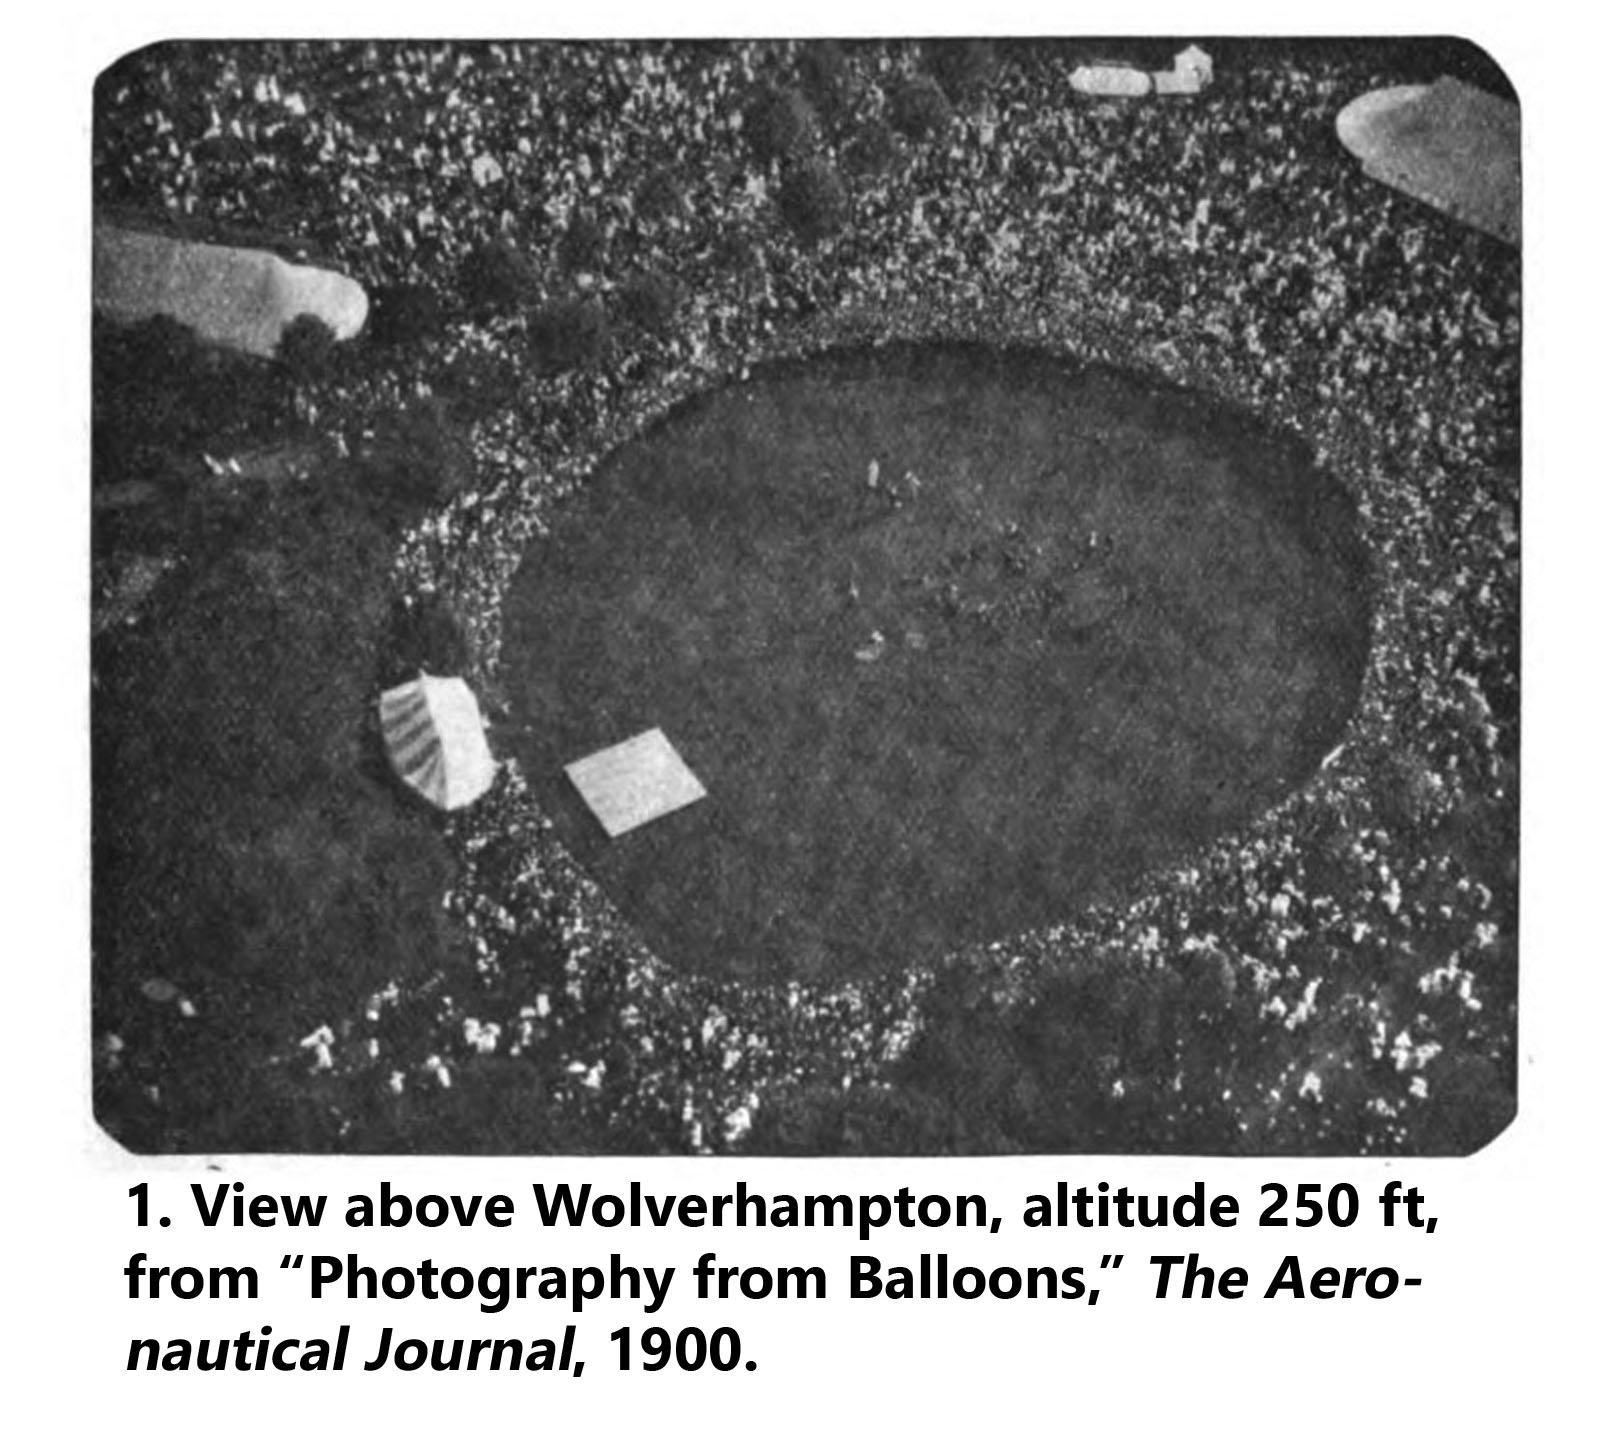 Aerial photograph above Wolverhampton, depicts crowd watching photographer ascend in a hydrogen balloon, 1900